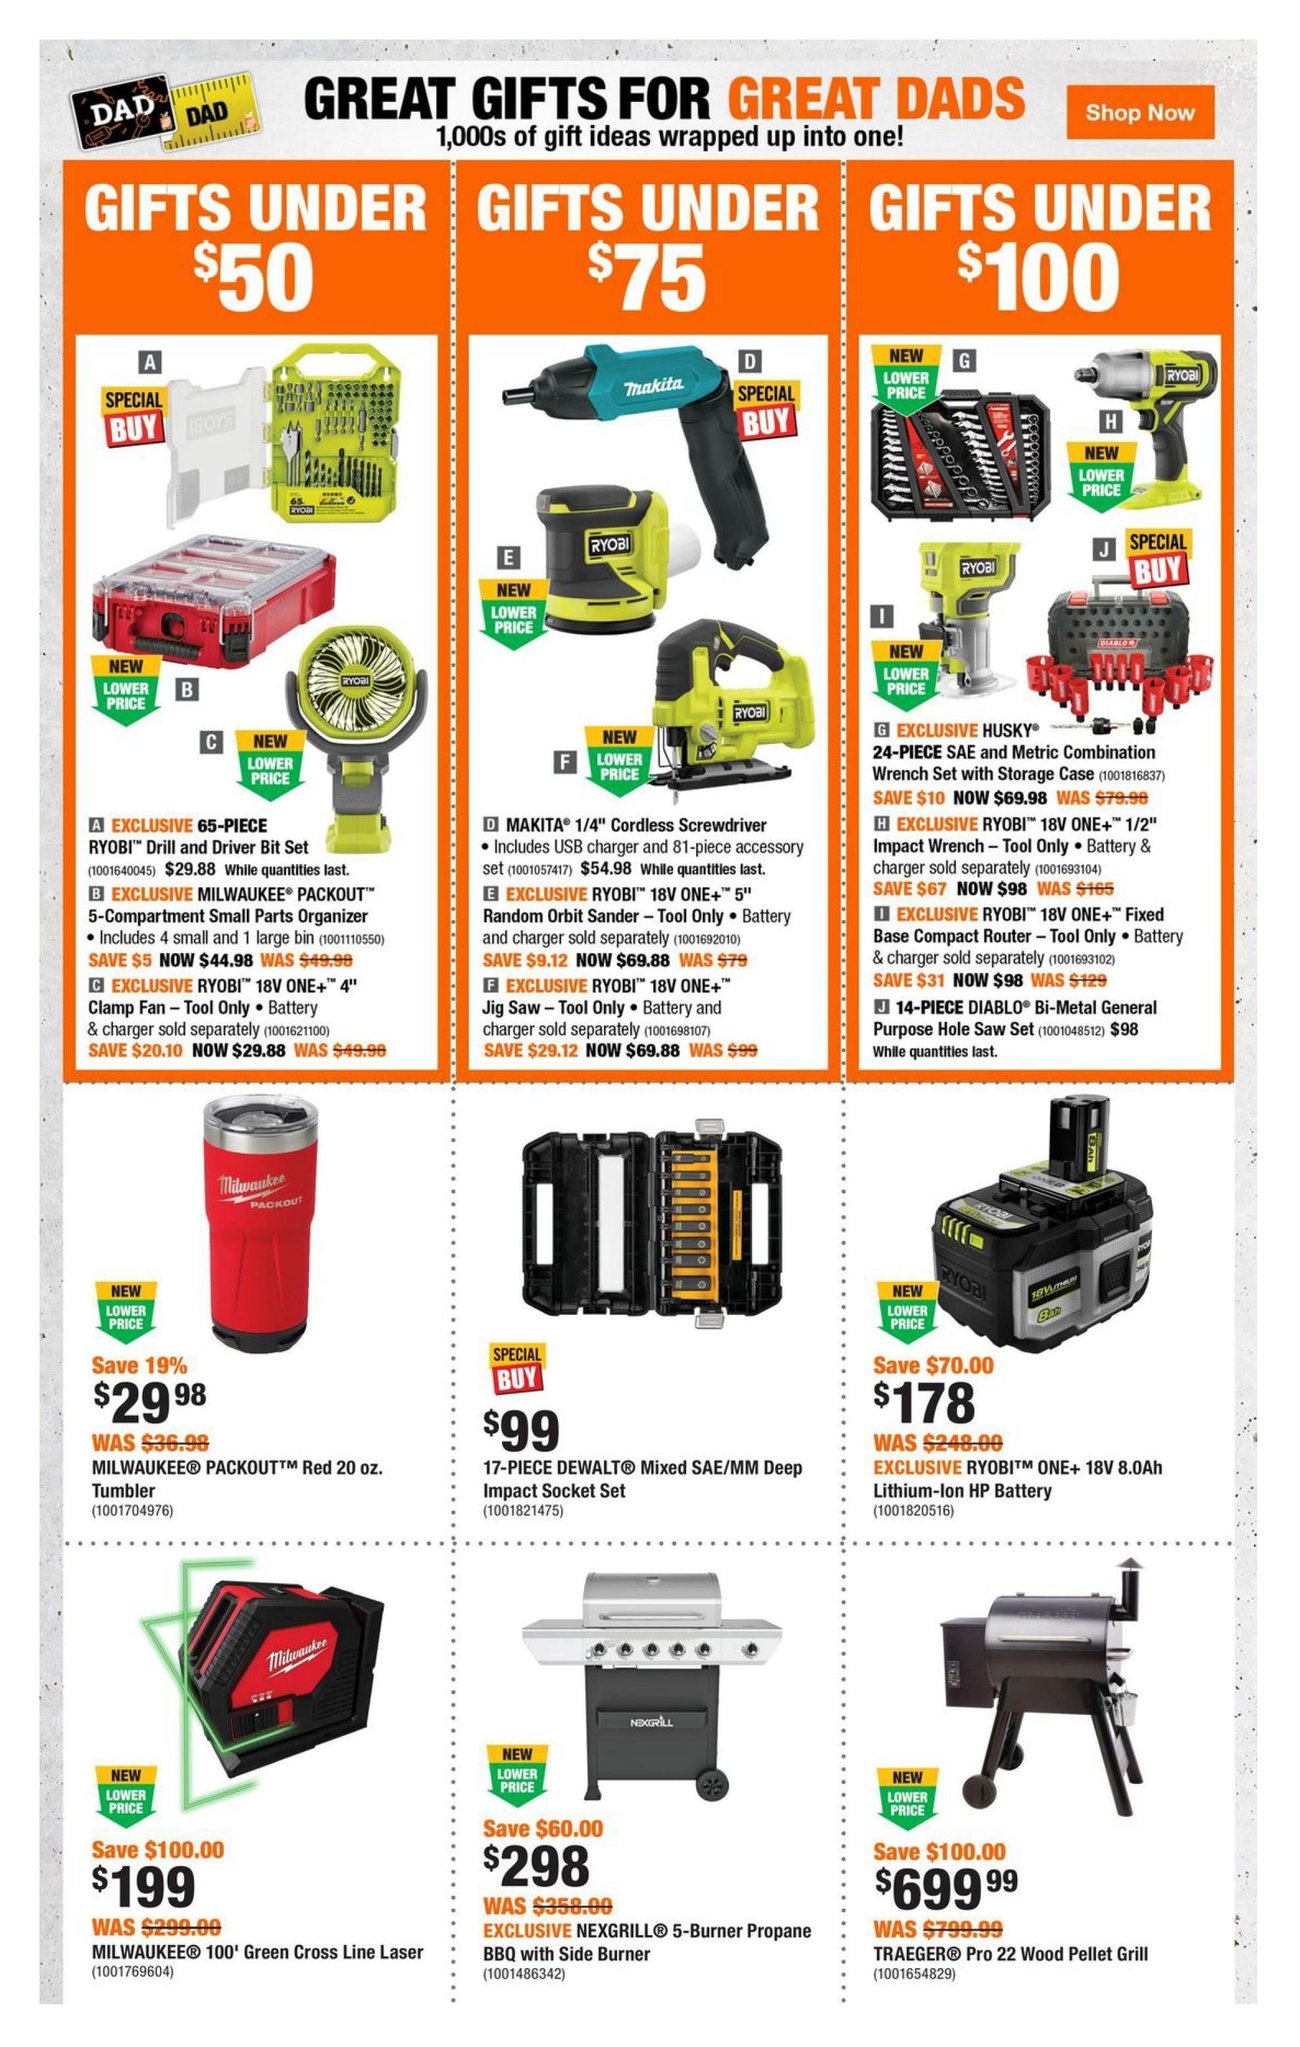 Home Depot - Father's Day Gift Guide - Page 2